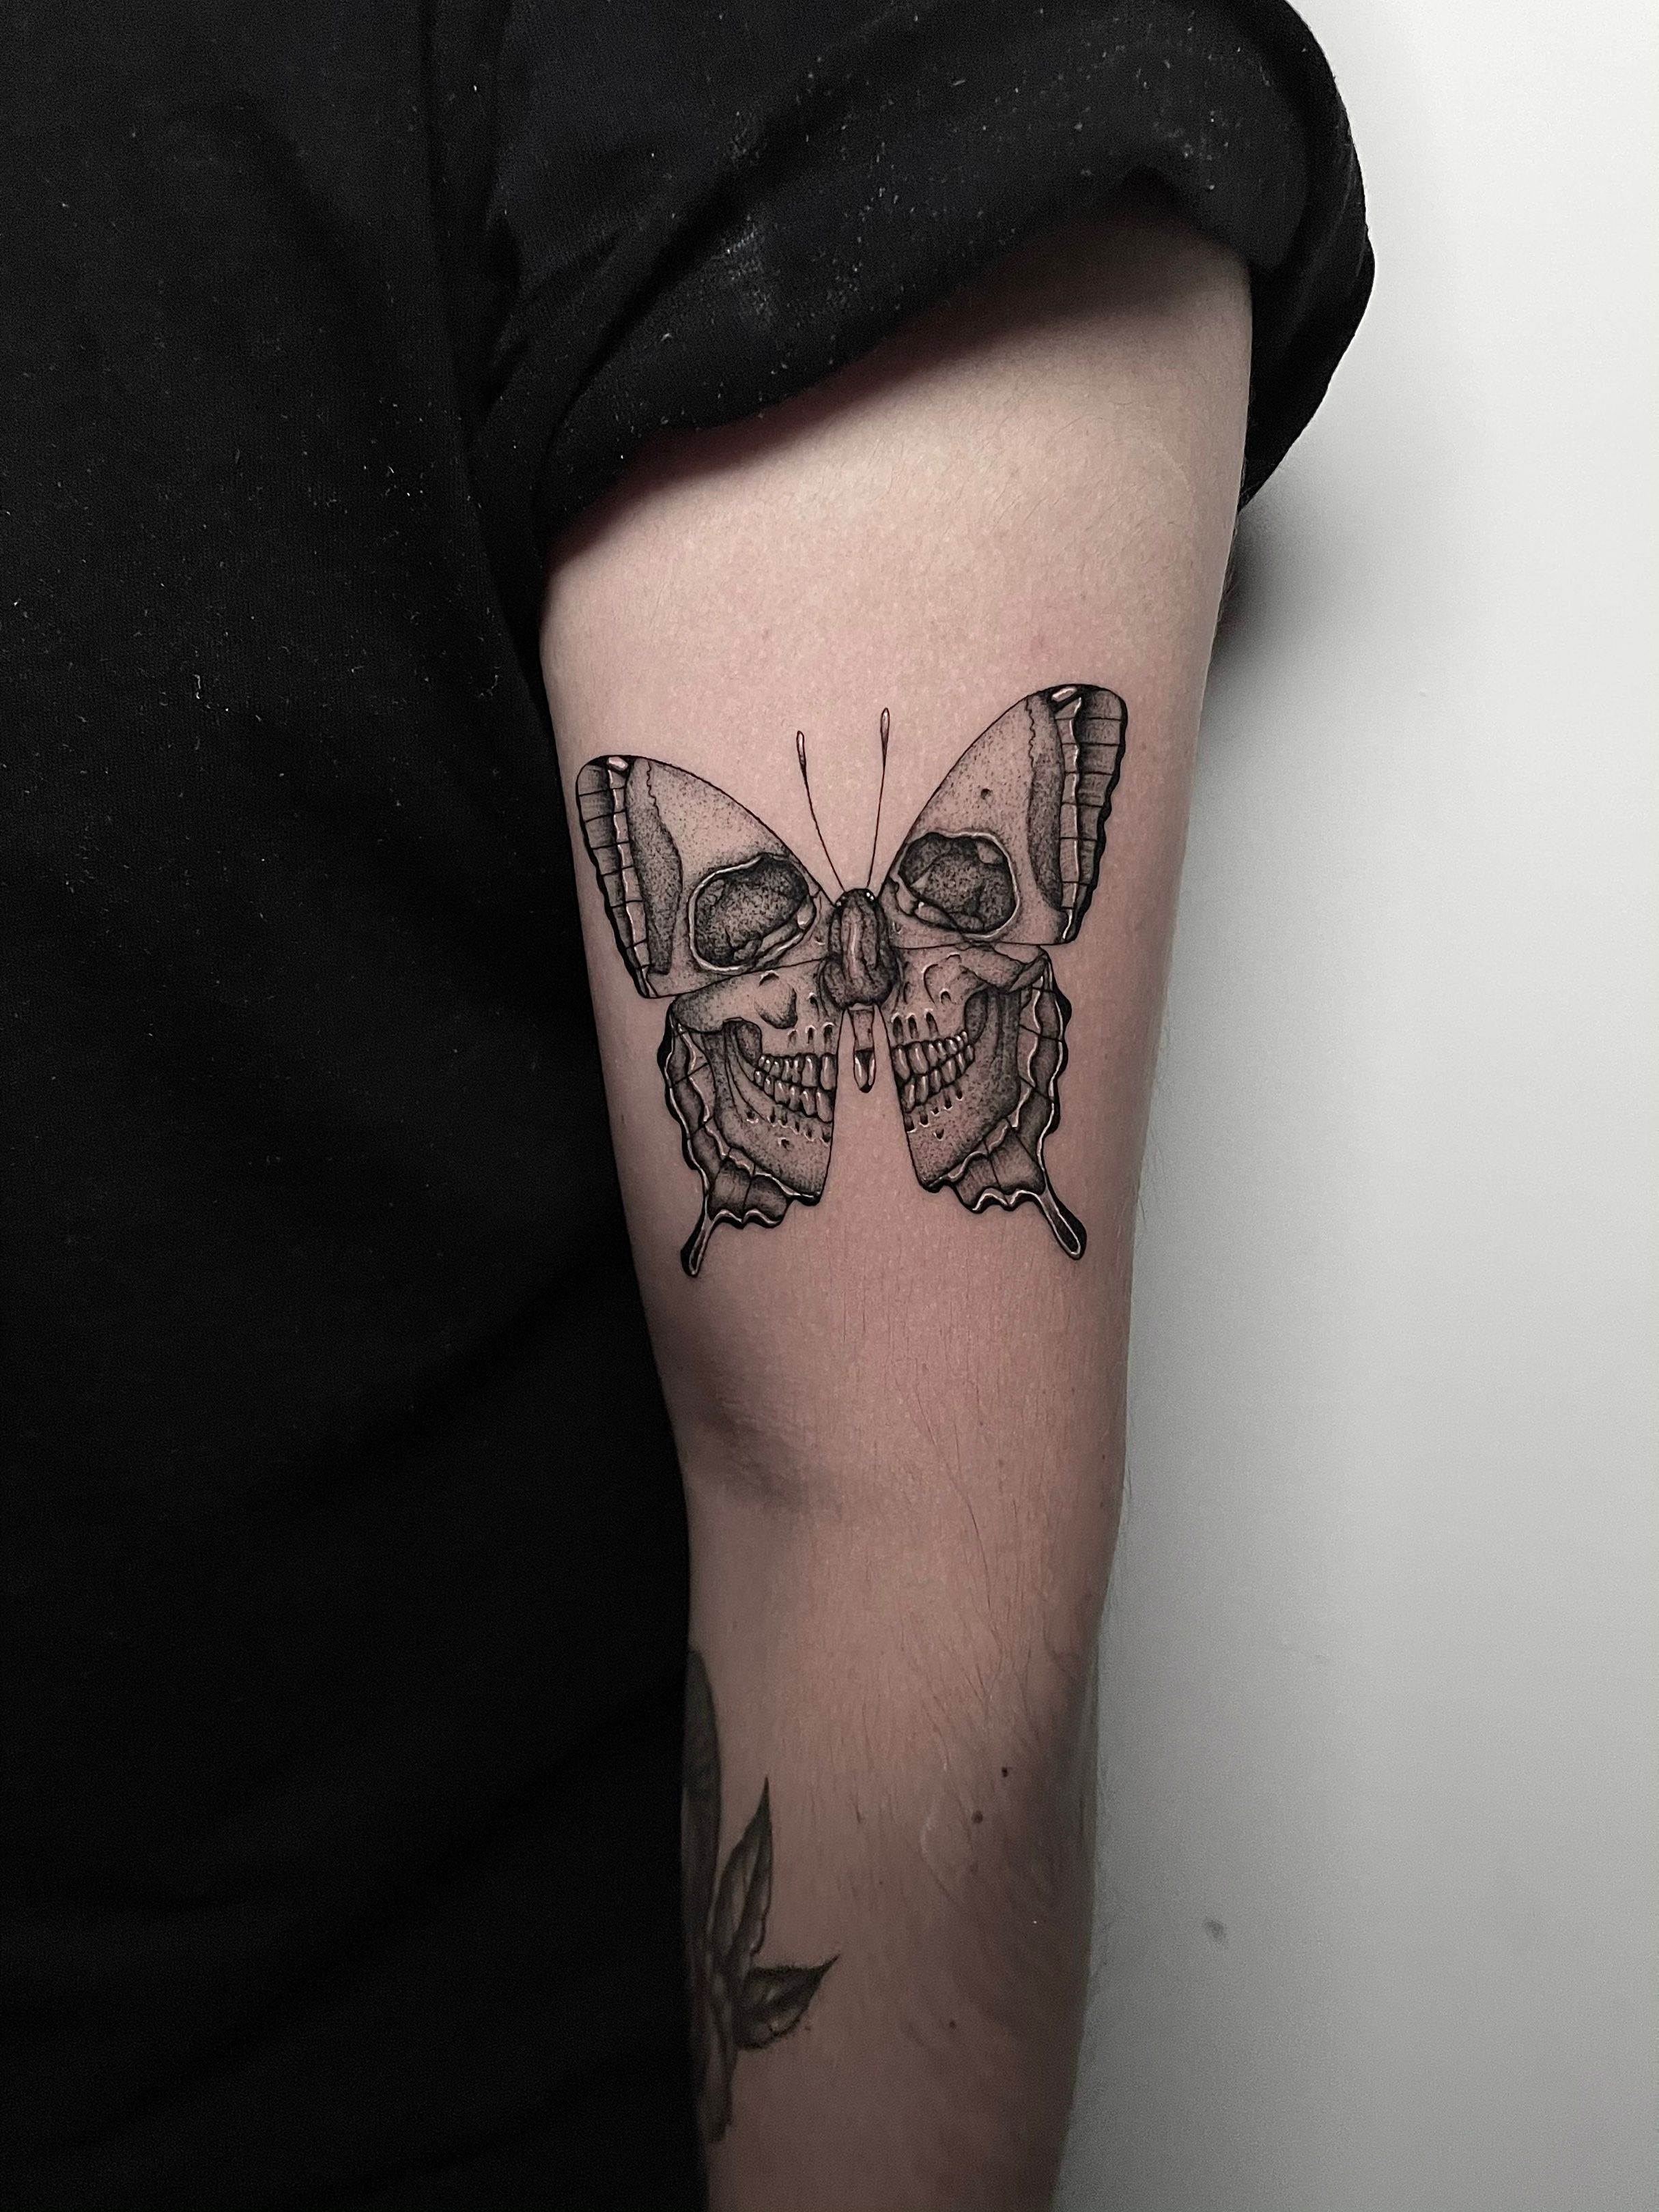 butterfly skull tattoo meaning